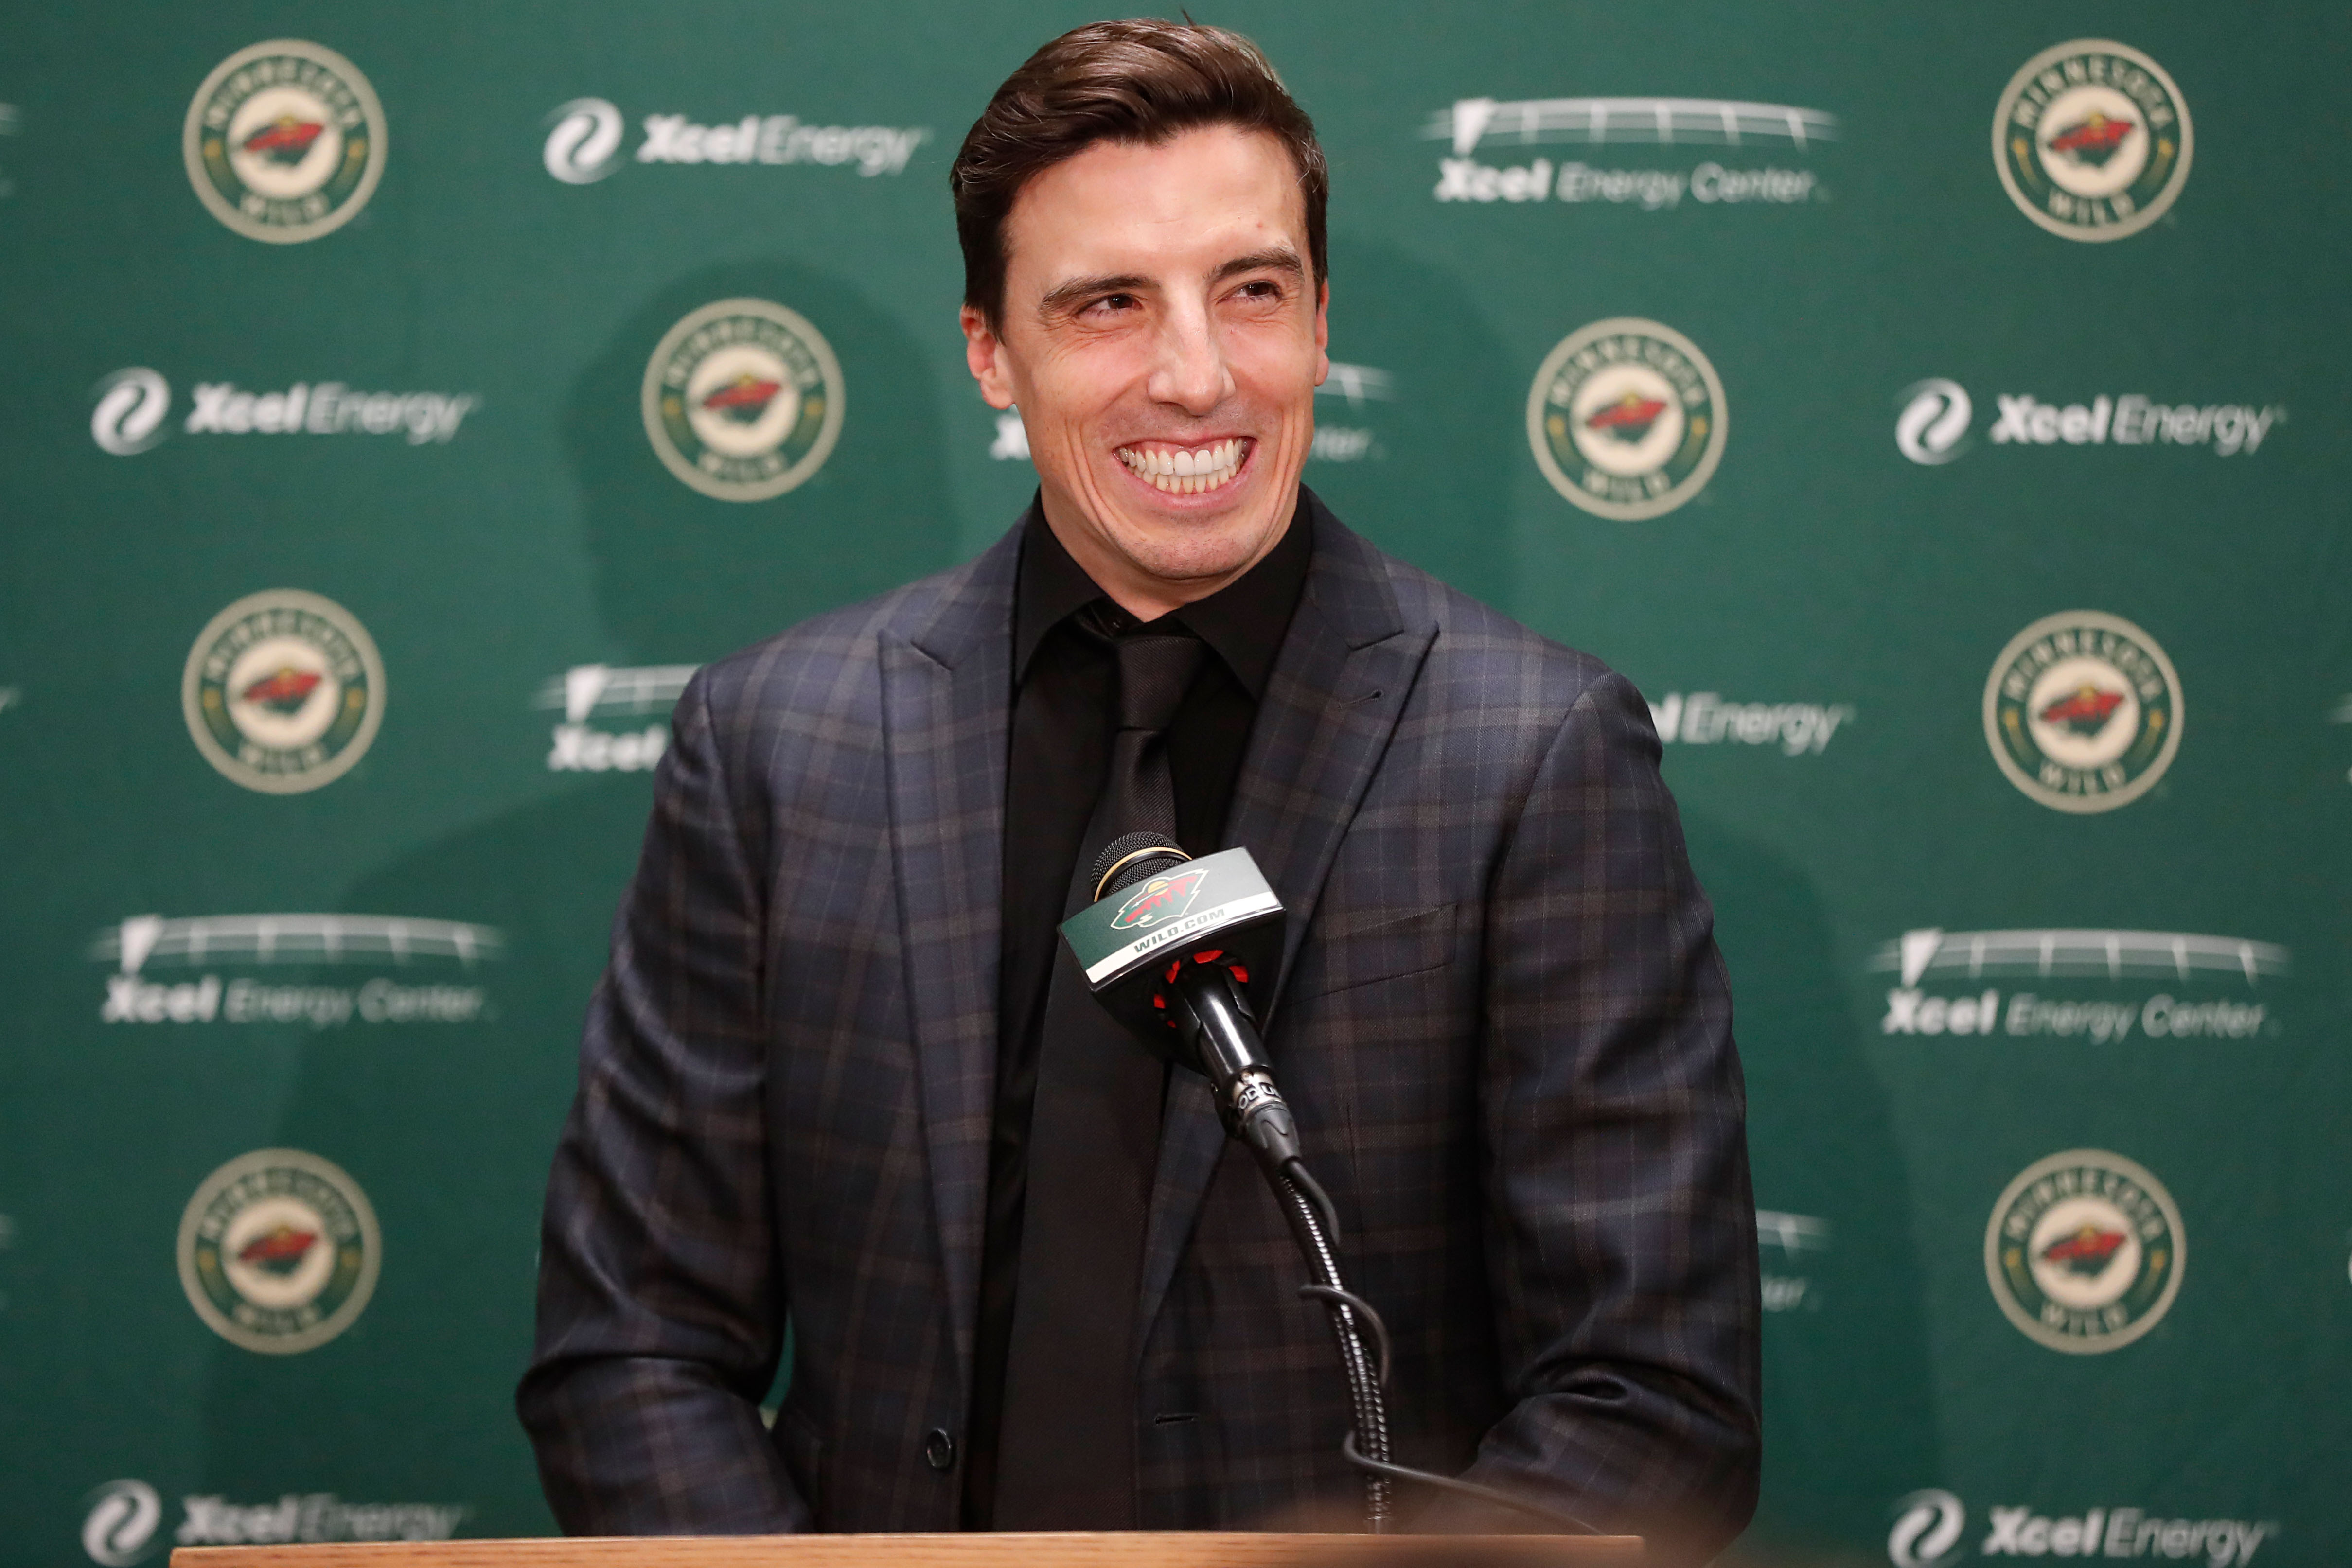 Marc-Andre Fleury #29 of the Minnesota Wild speaks at a press conference prior to the game against the Vegas Golden Knights at the Xcel Energy Center on March 21, 2022 in Saint Paul, Minnesota.